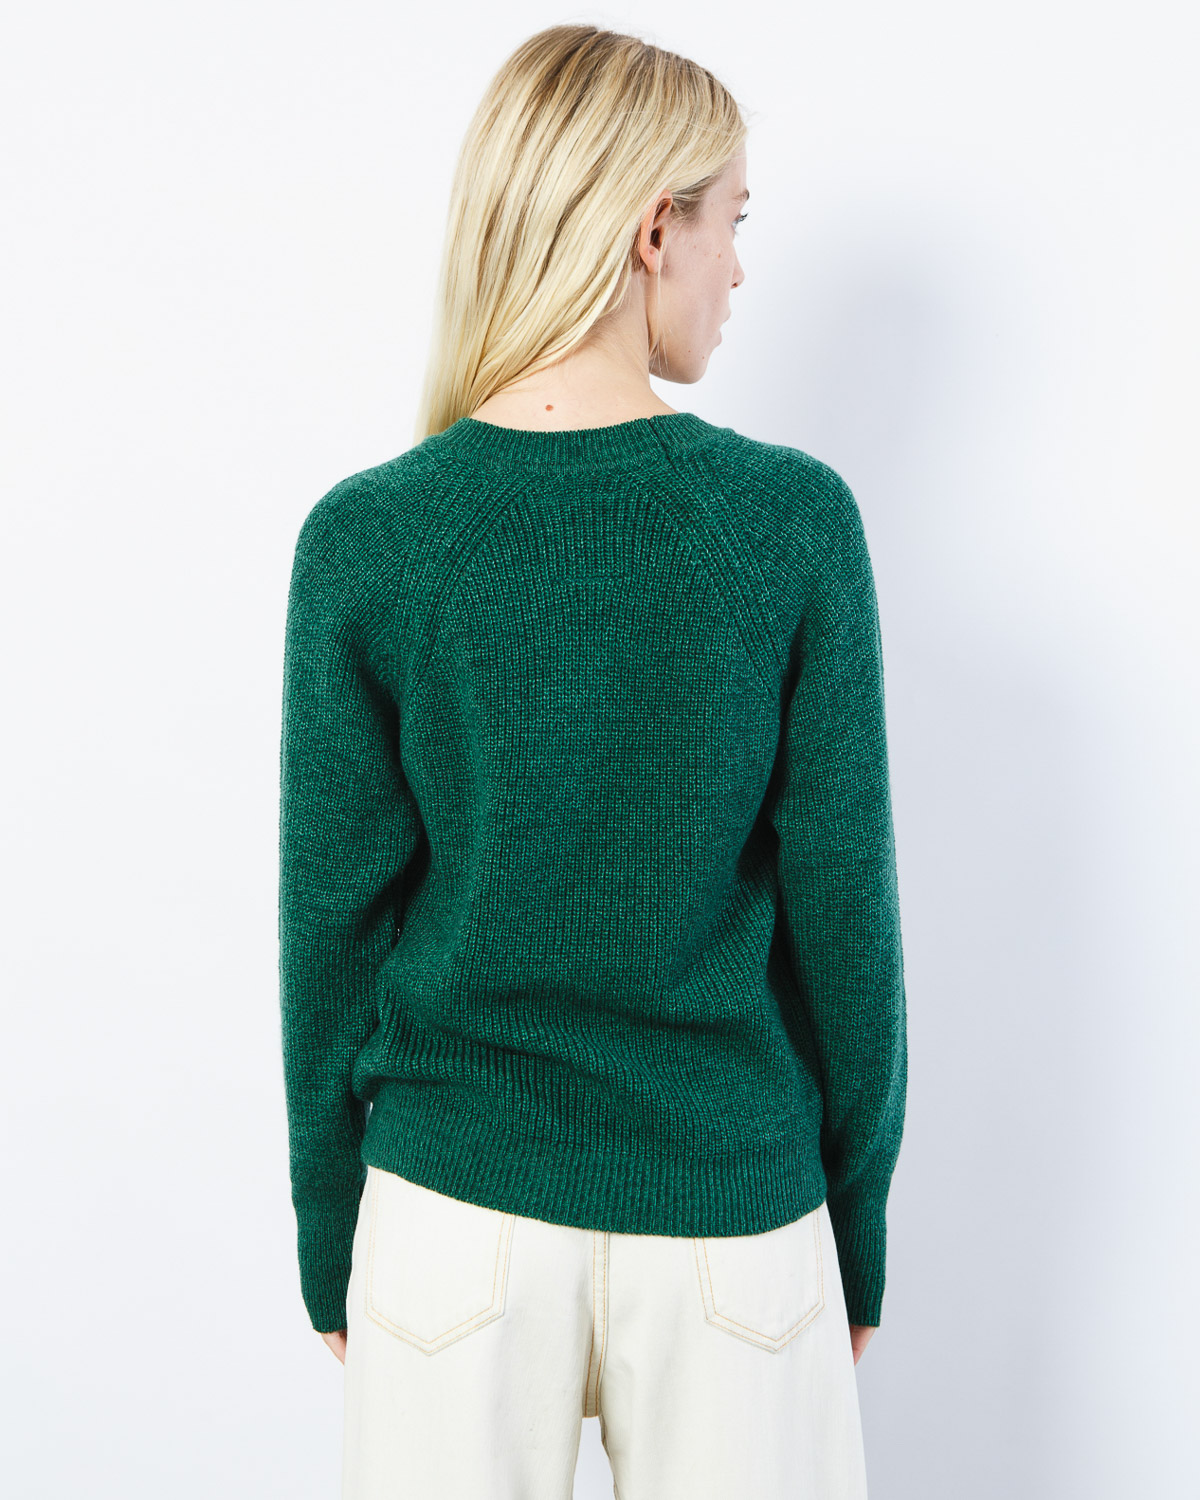 wanama_sweater-lucie-_59-19-2022__picture-24153